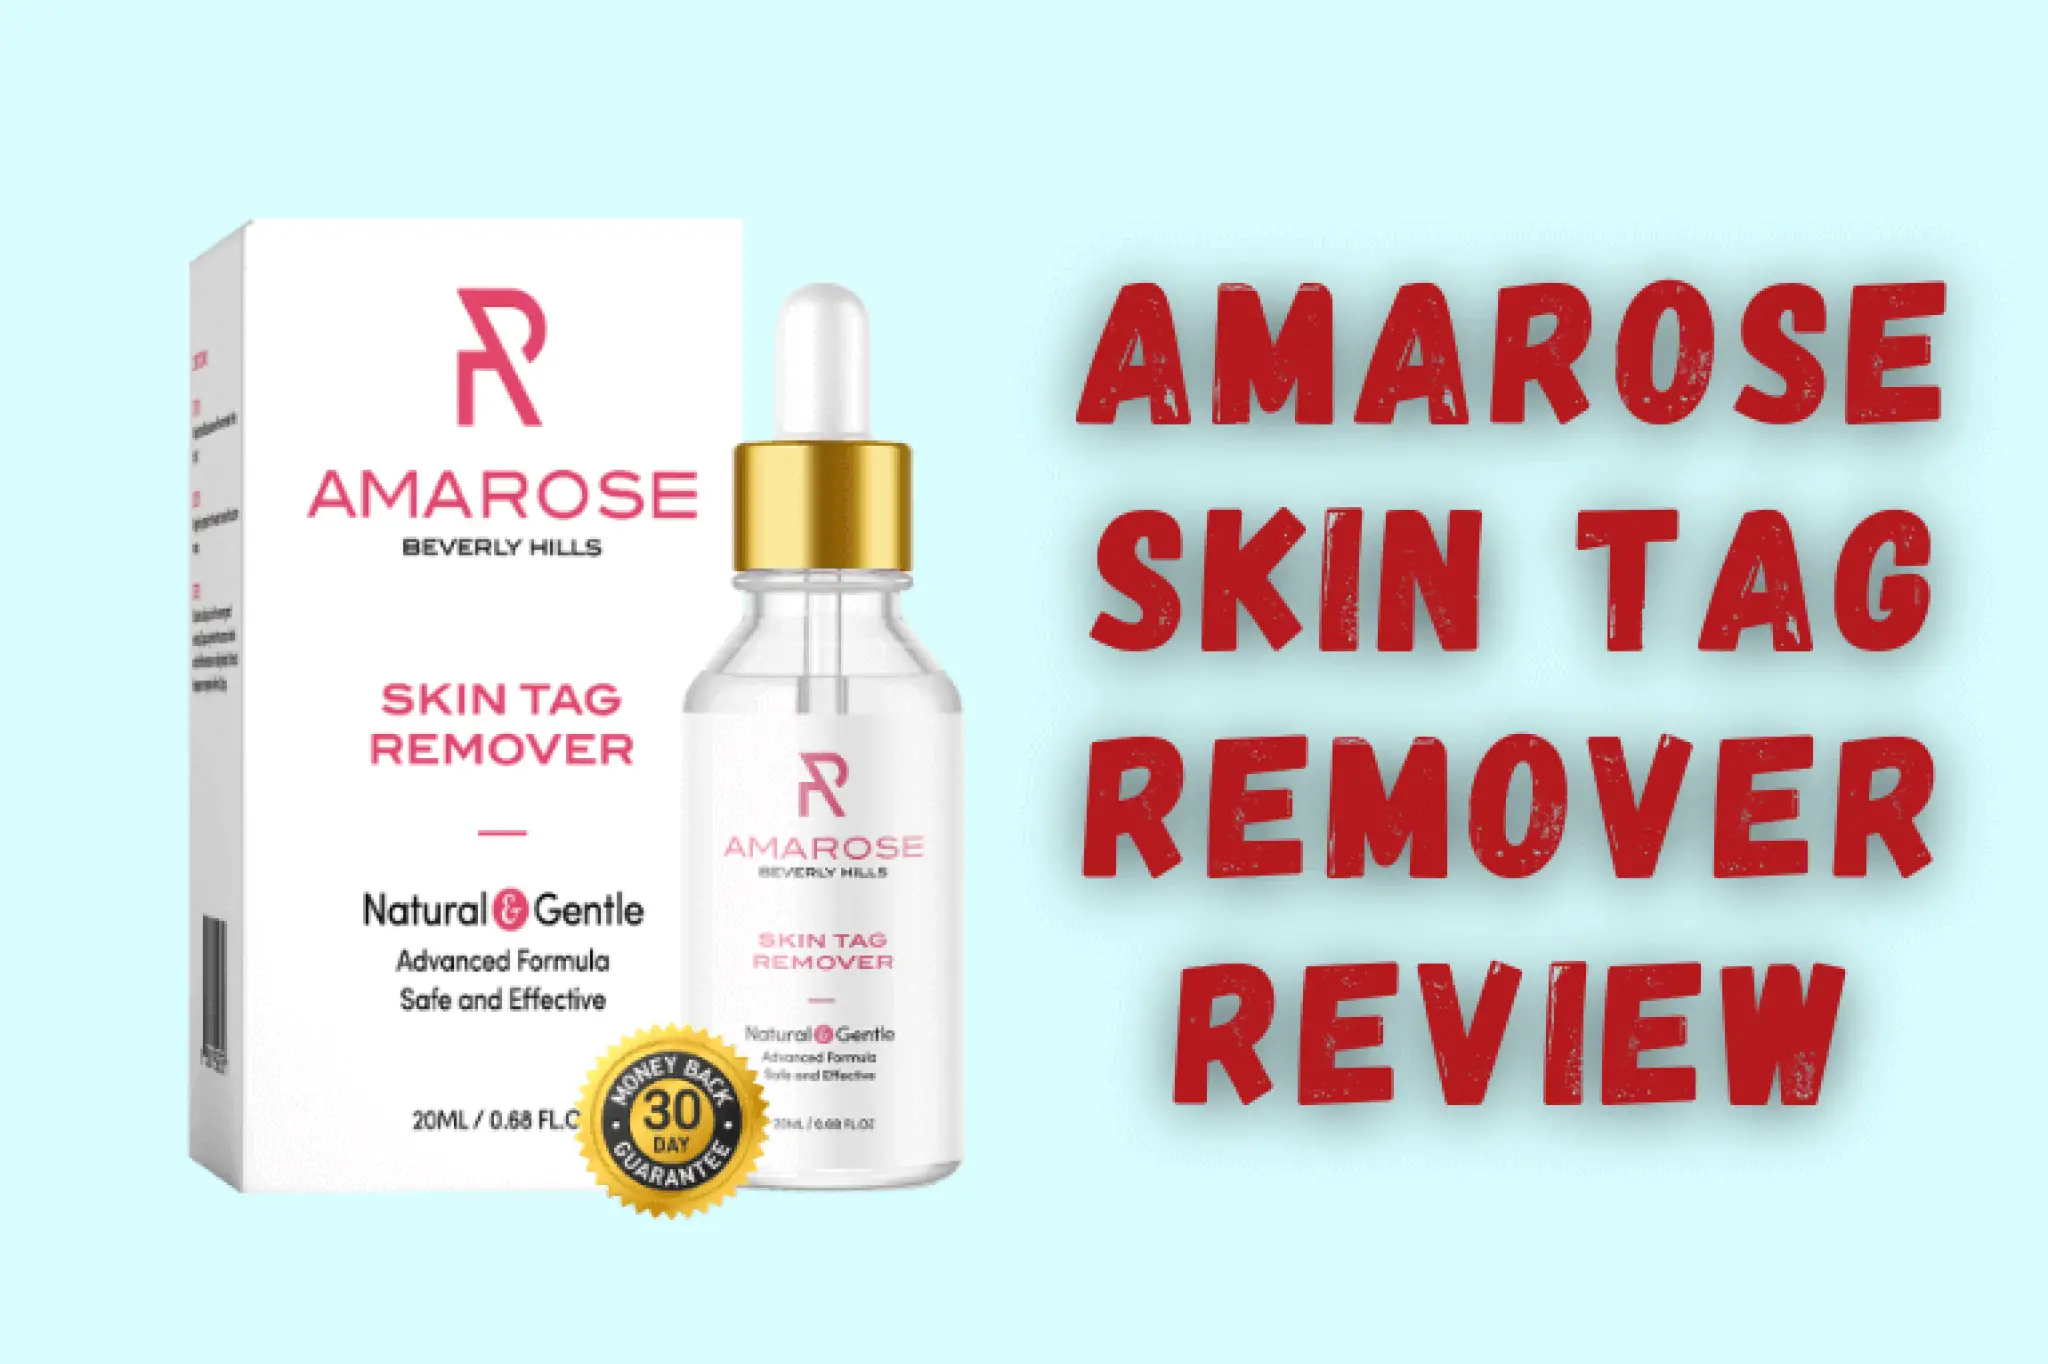 Amarose Skin Tag Remover Review - How Does It Work? [Must Read]